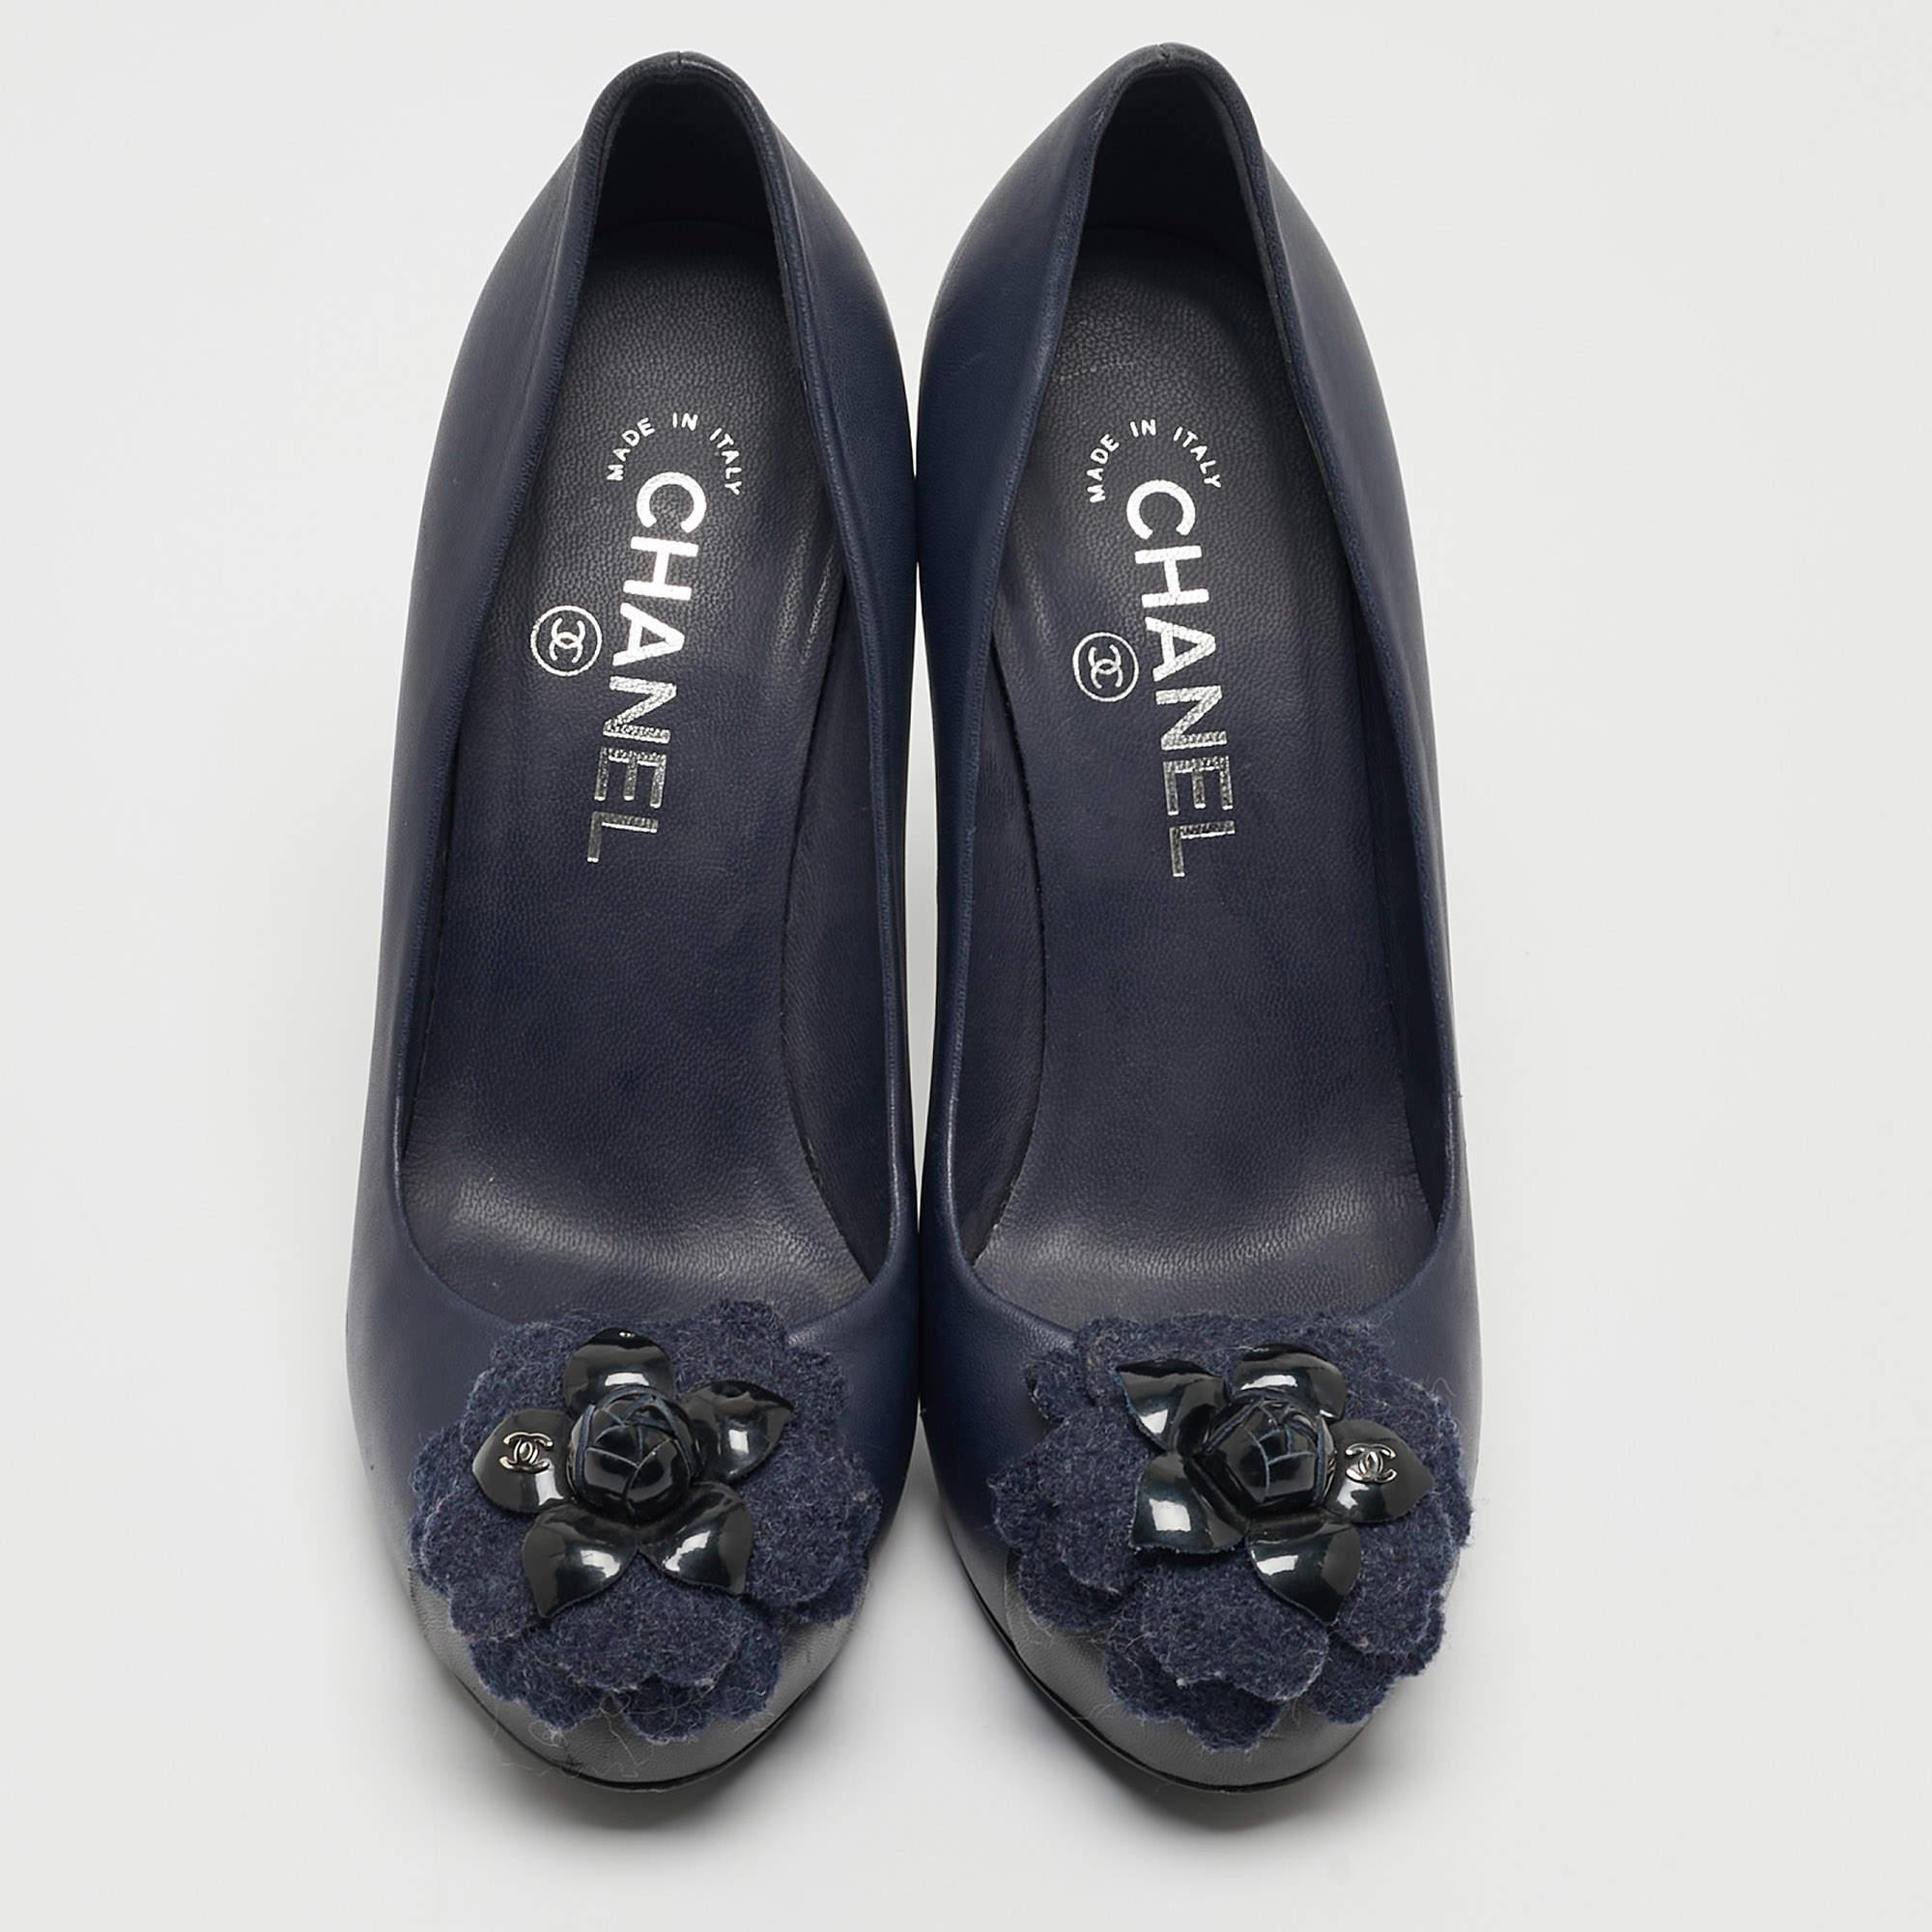 We always love to see creations as elegant as these pumps from Chanel. They have been wonderfully designed using leather and are designed with Camellia on the cap toes. Complete with 12cm heels and platforms, these pumps will bestow you with style